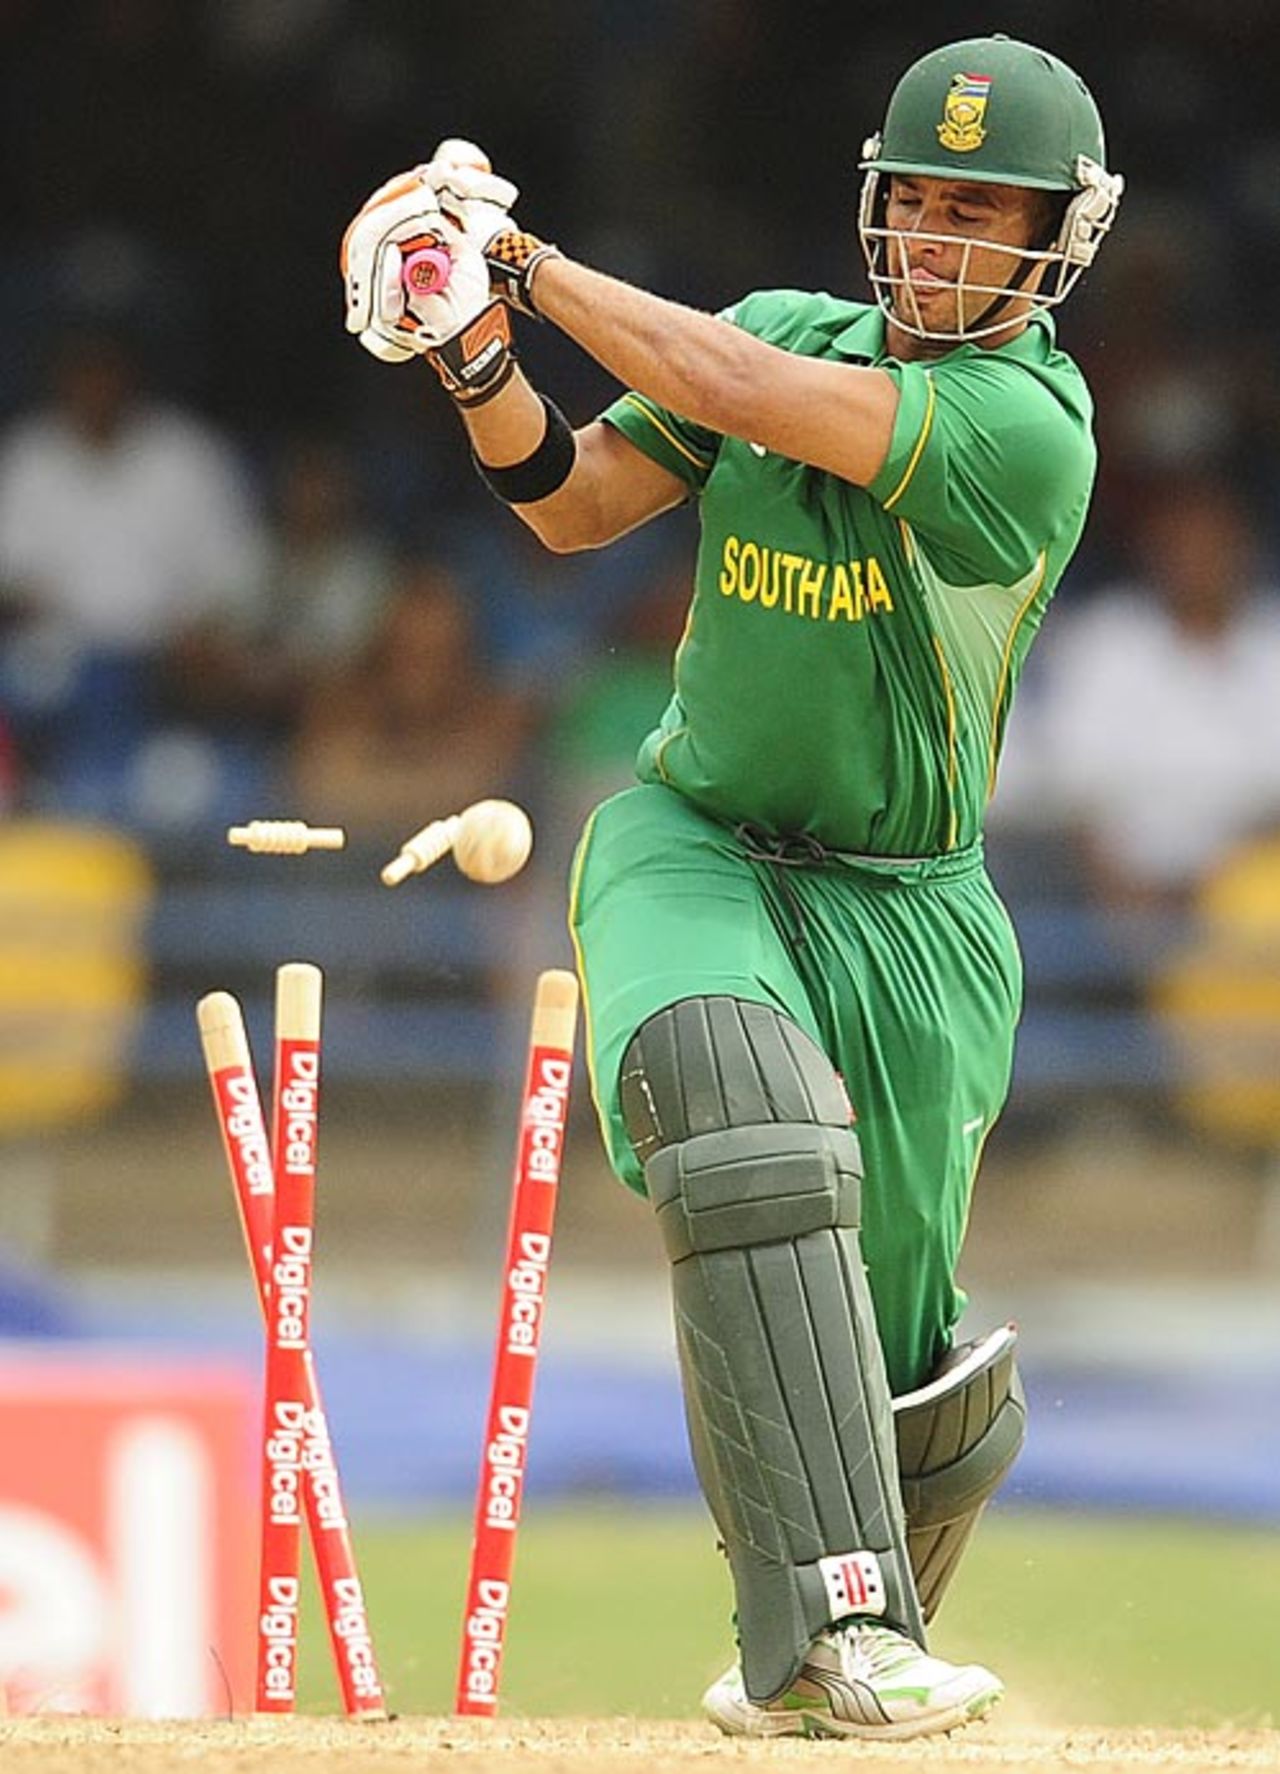 JP Duminy was bowled by Jerome Taylor, West Indies v South Africa, 5th ODI, Port of Spain, Trinidad, June 3, 2010